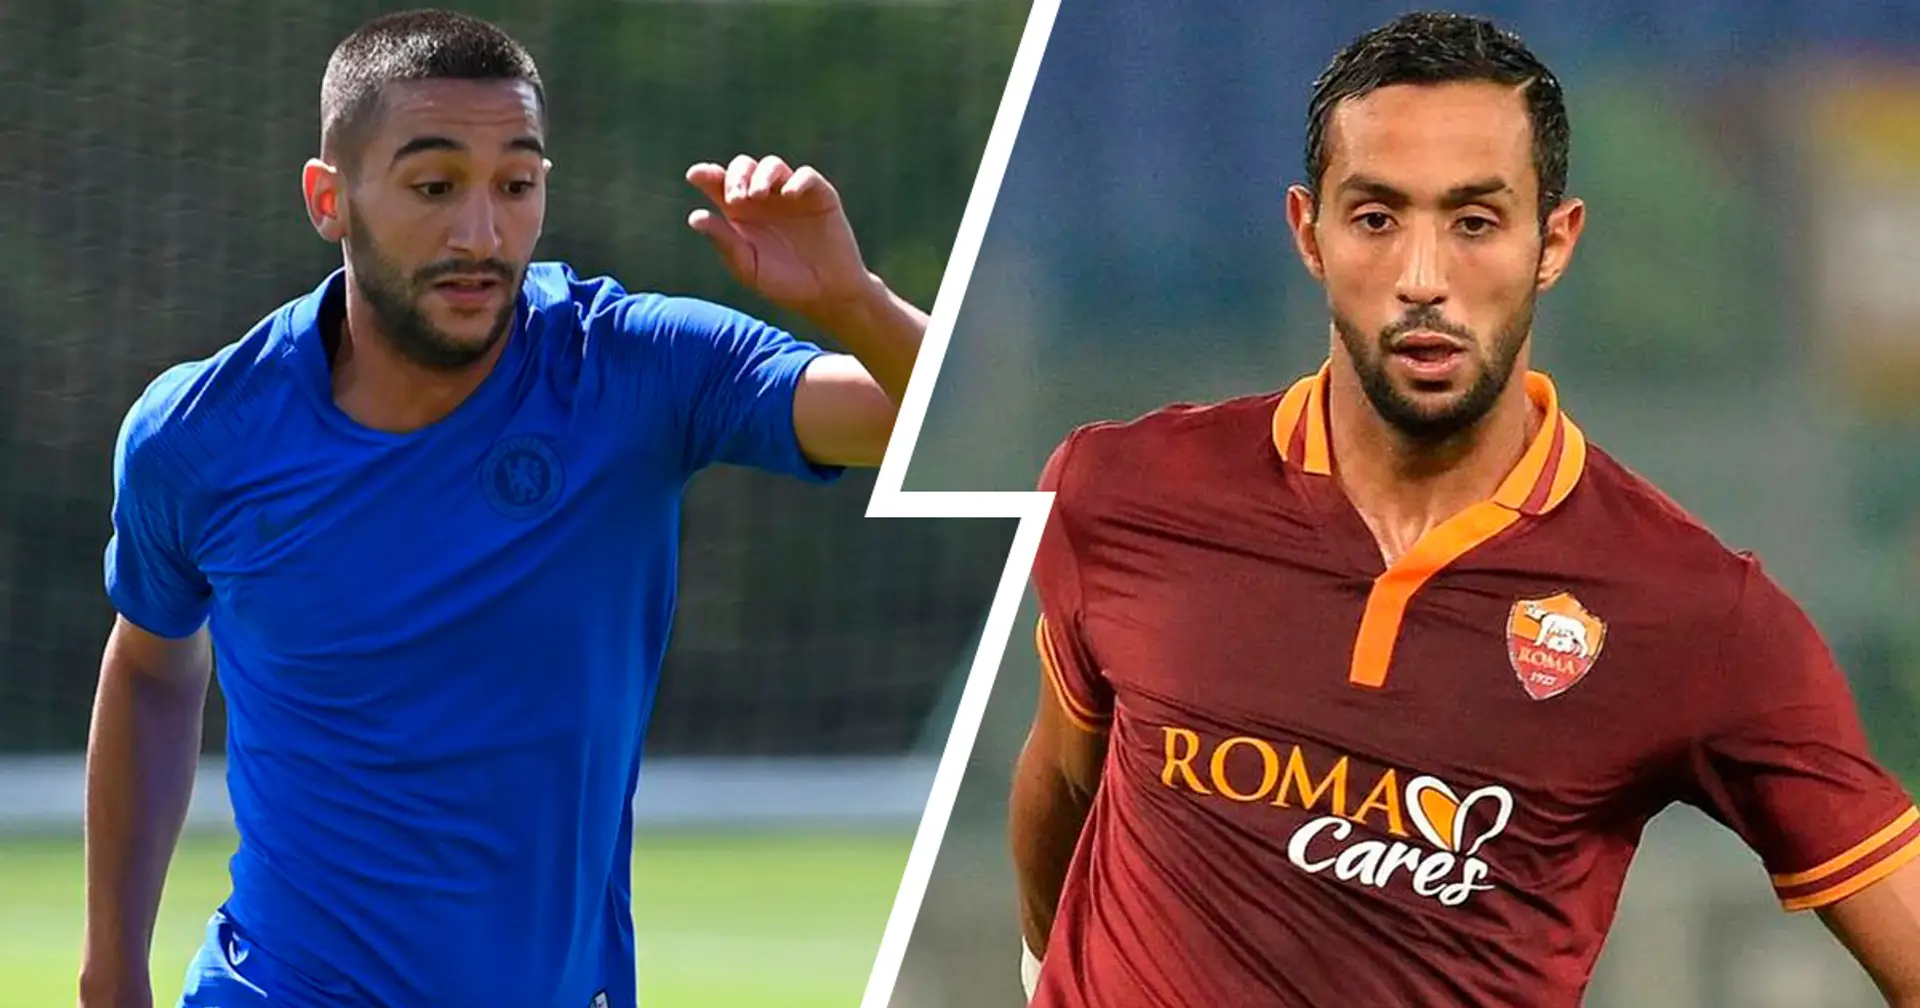 'He would’ve run to join this club': Former Morocco captain Benatia recalls how Roma considered signing Ziyech 'excessive expense'